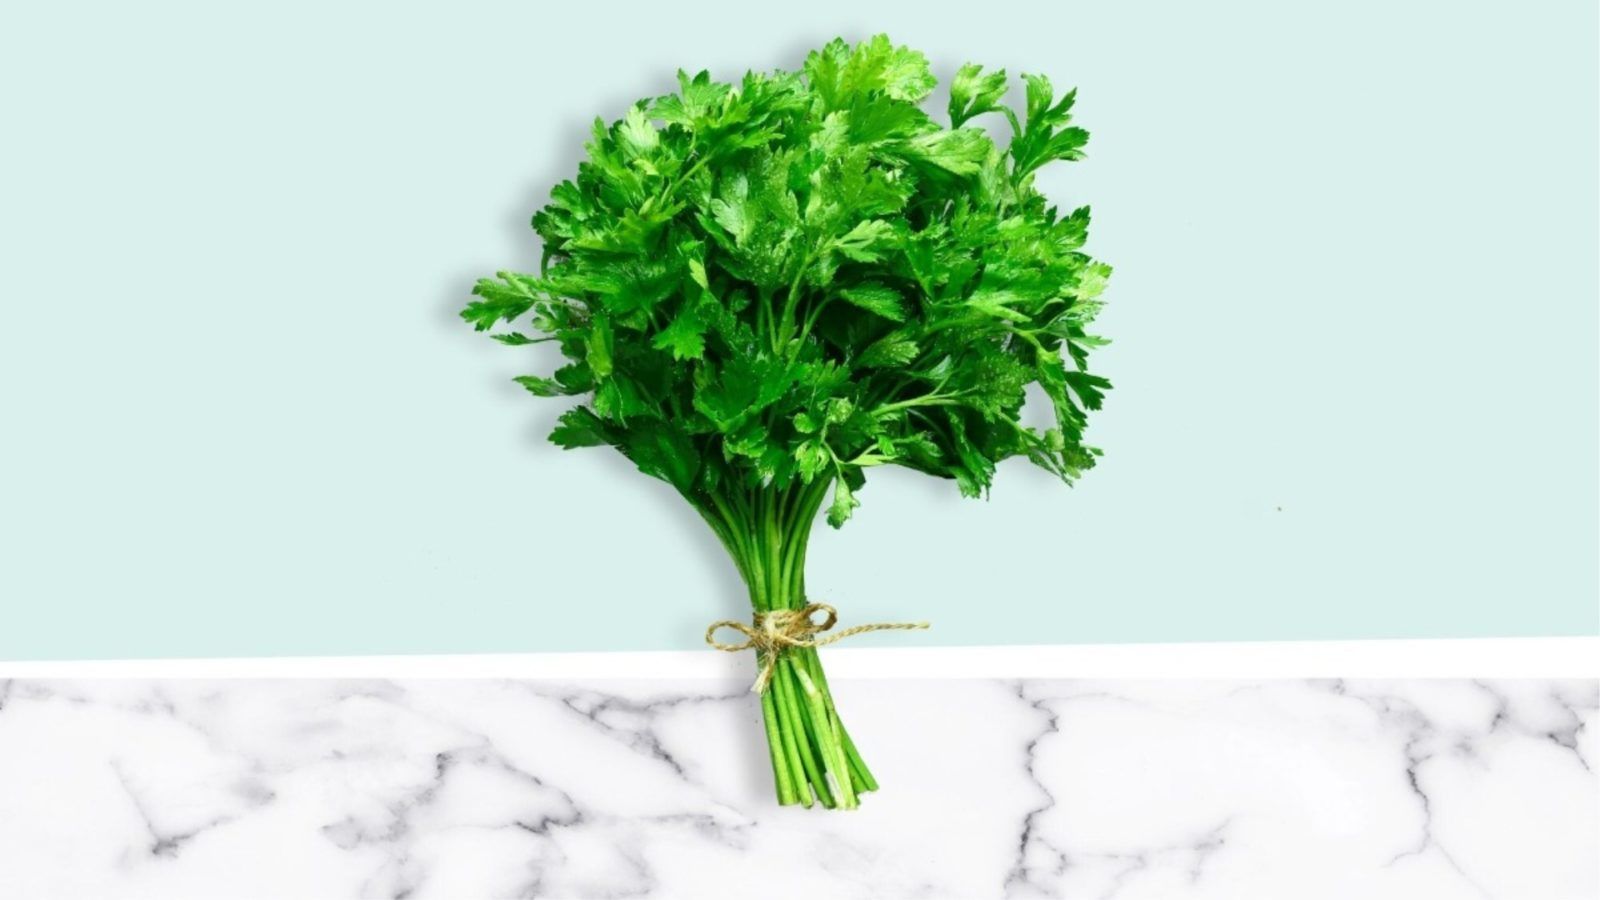 All about the health benefits and nutritional information of cilantro